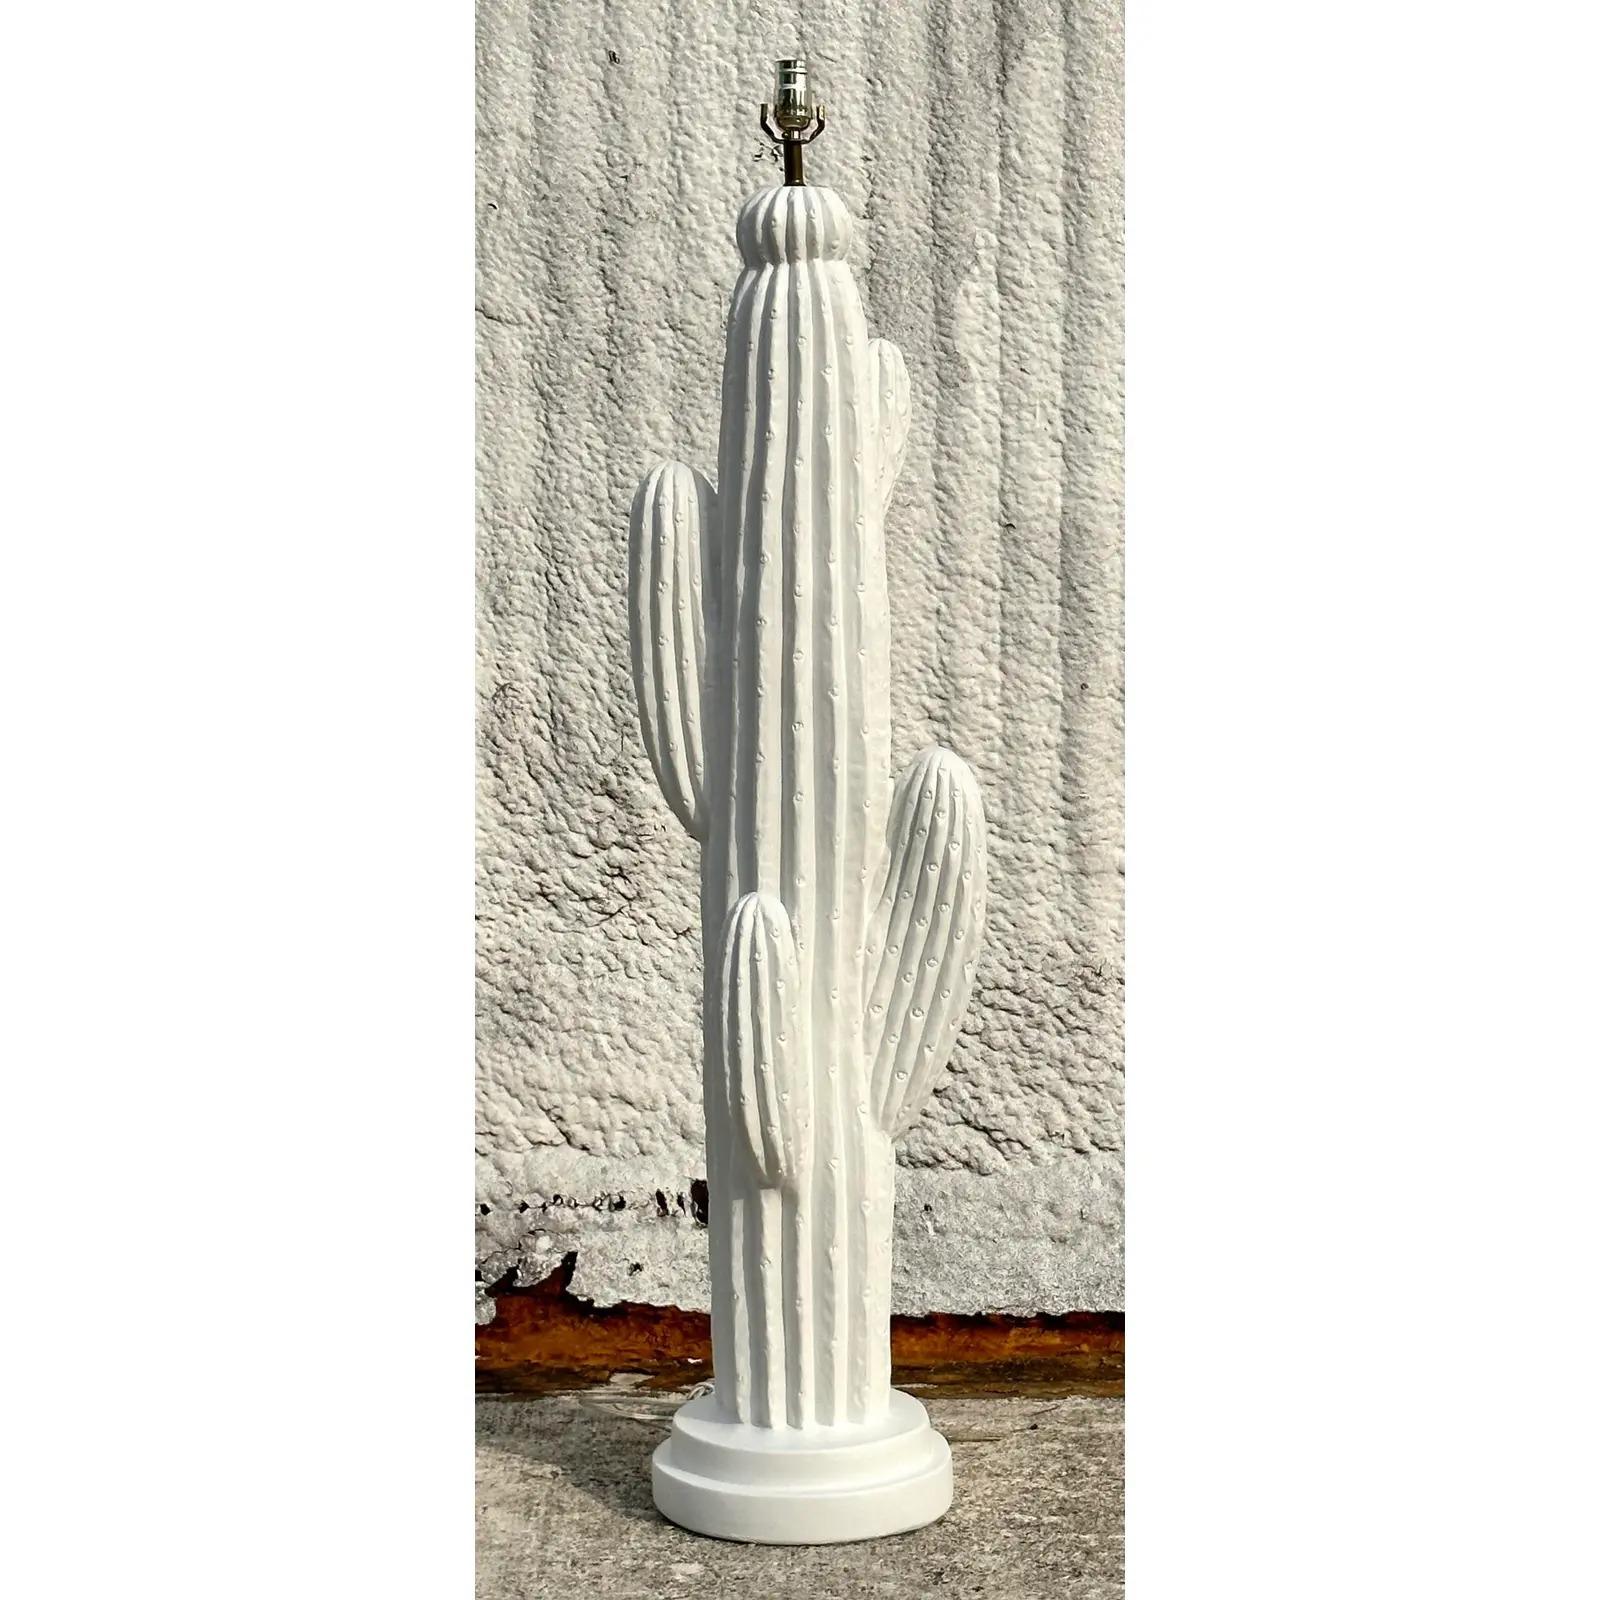 A fantastic vintage Boho floor lamp. Beautiful cactus design in a matte white finish. Acquired from a Palm Beach estate.